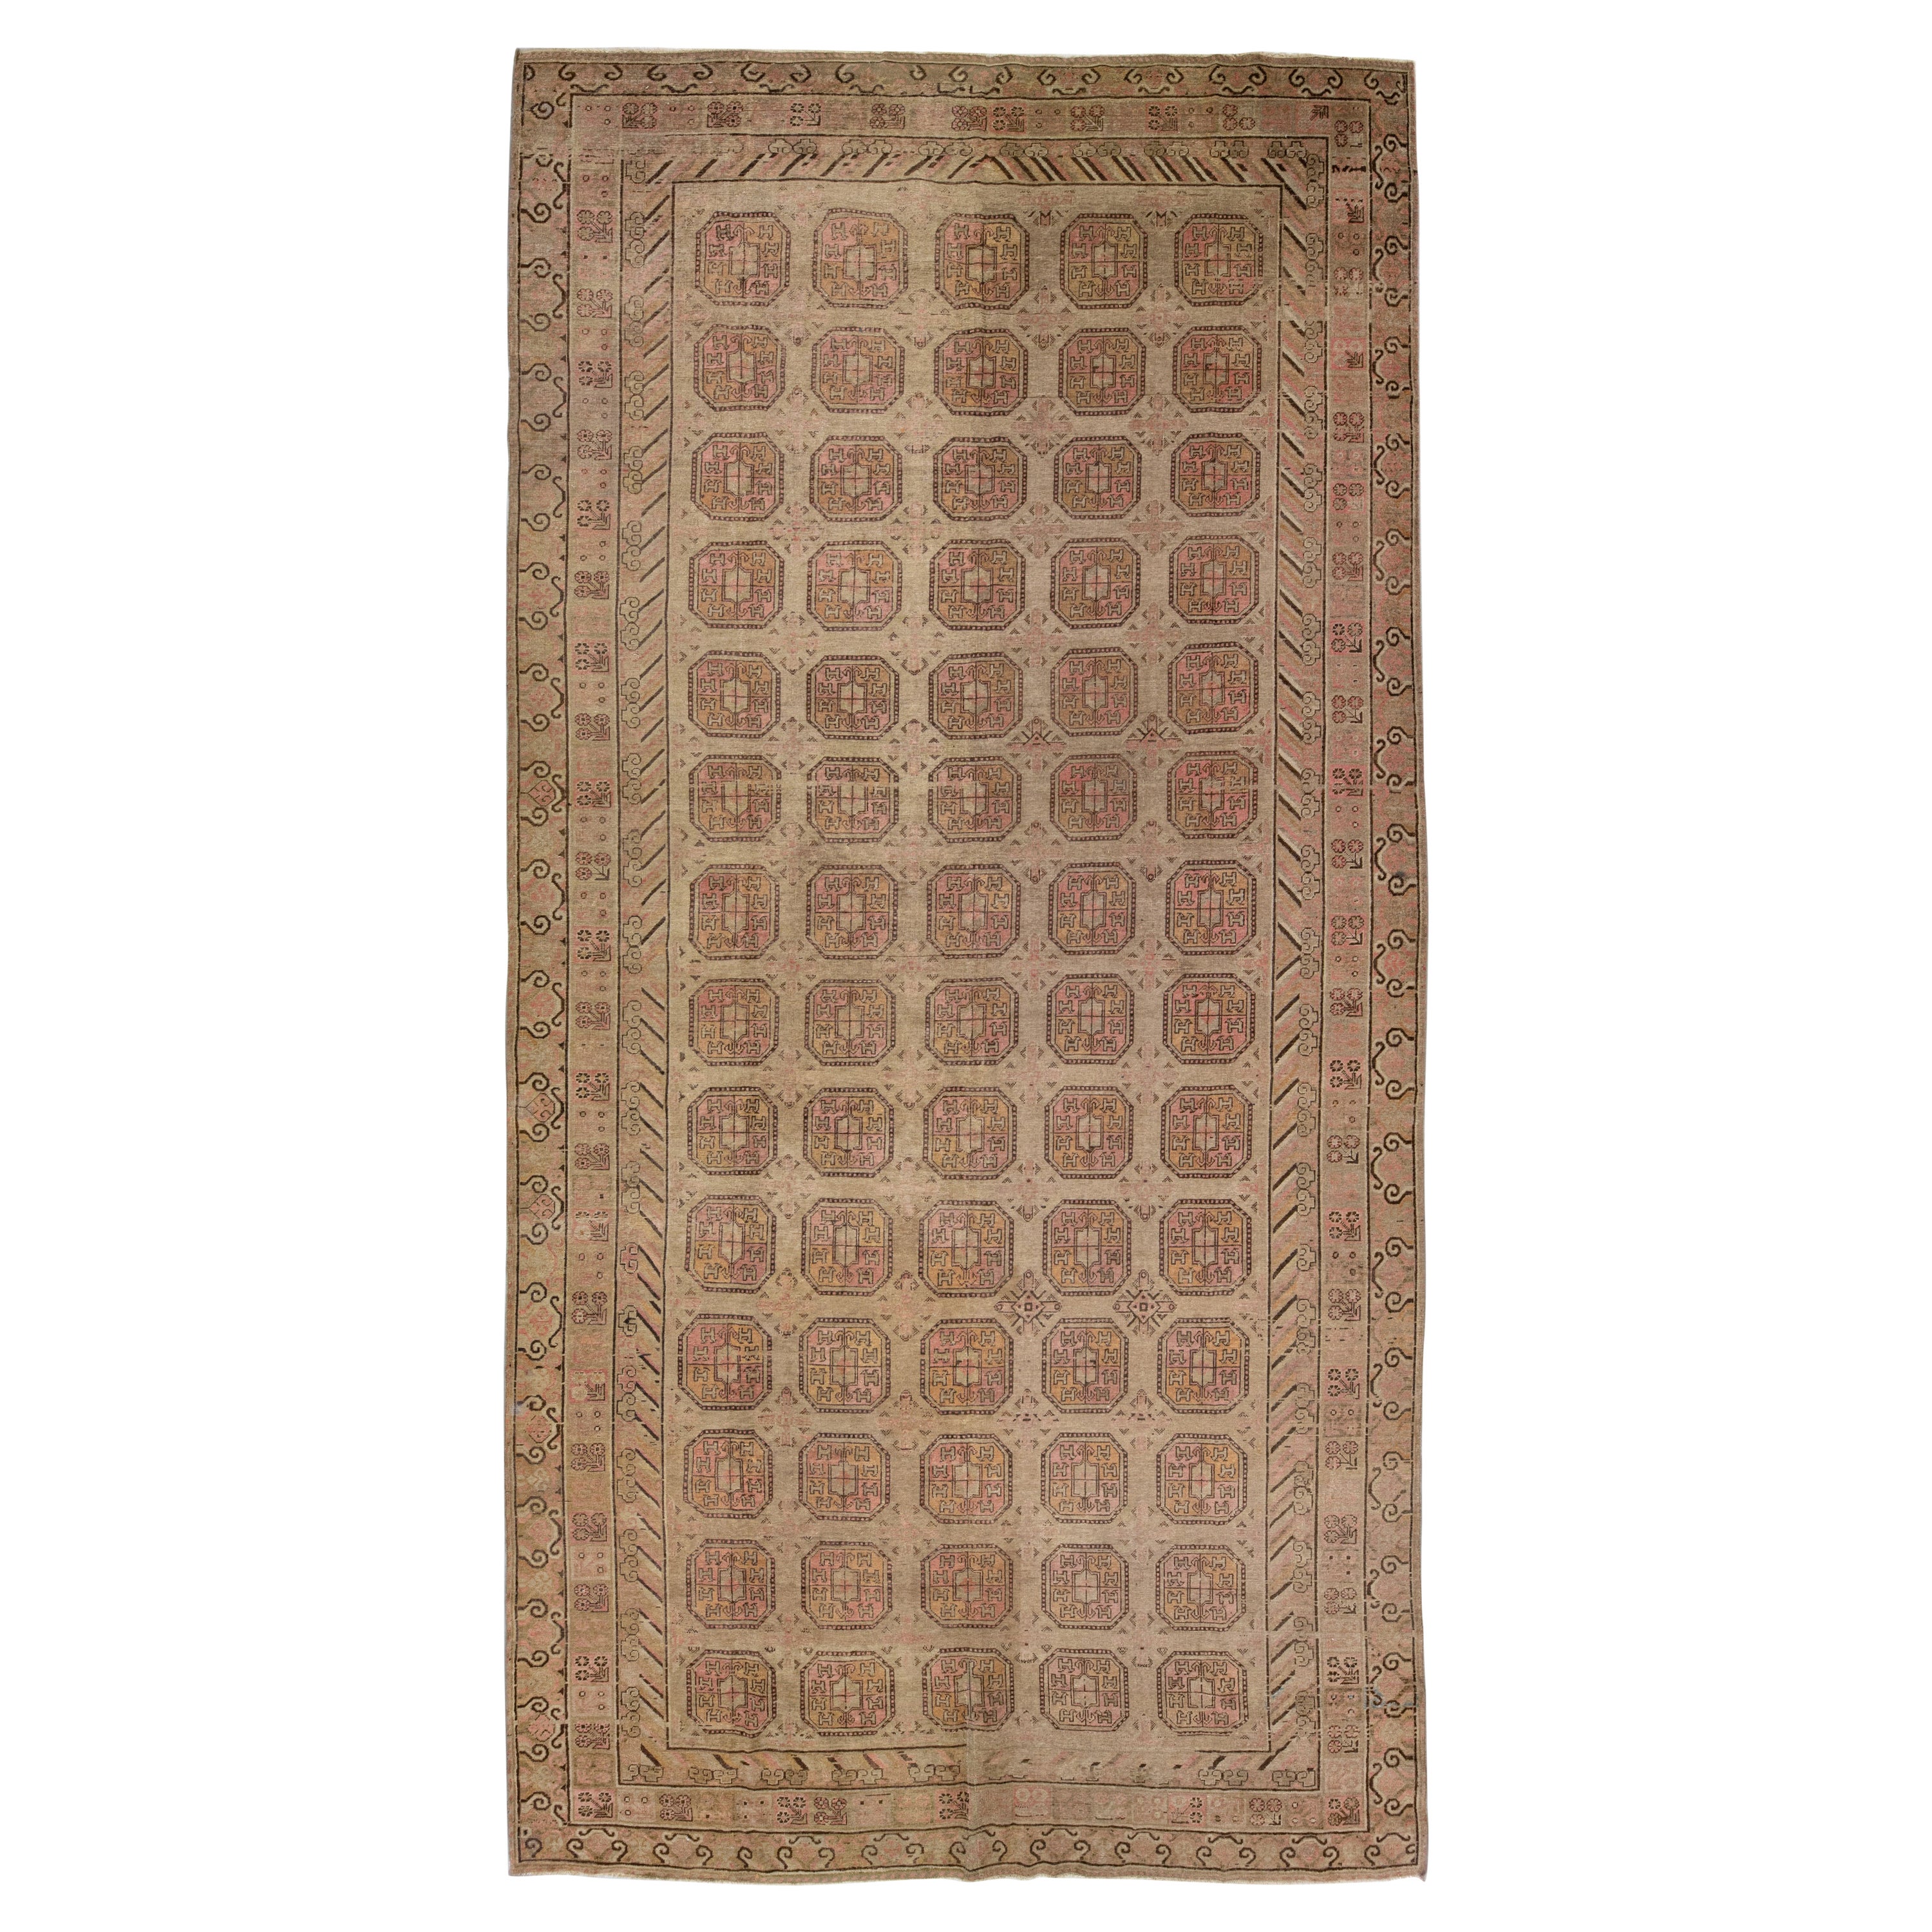 1900s Antique Brown Handmade Khotan Wool Rug with Geometric Pattern For Sale